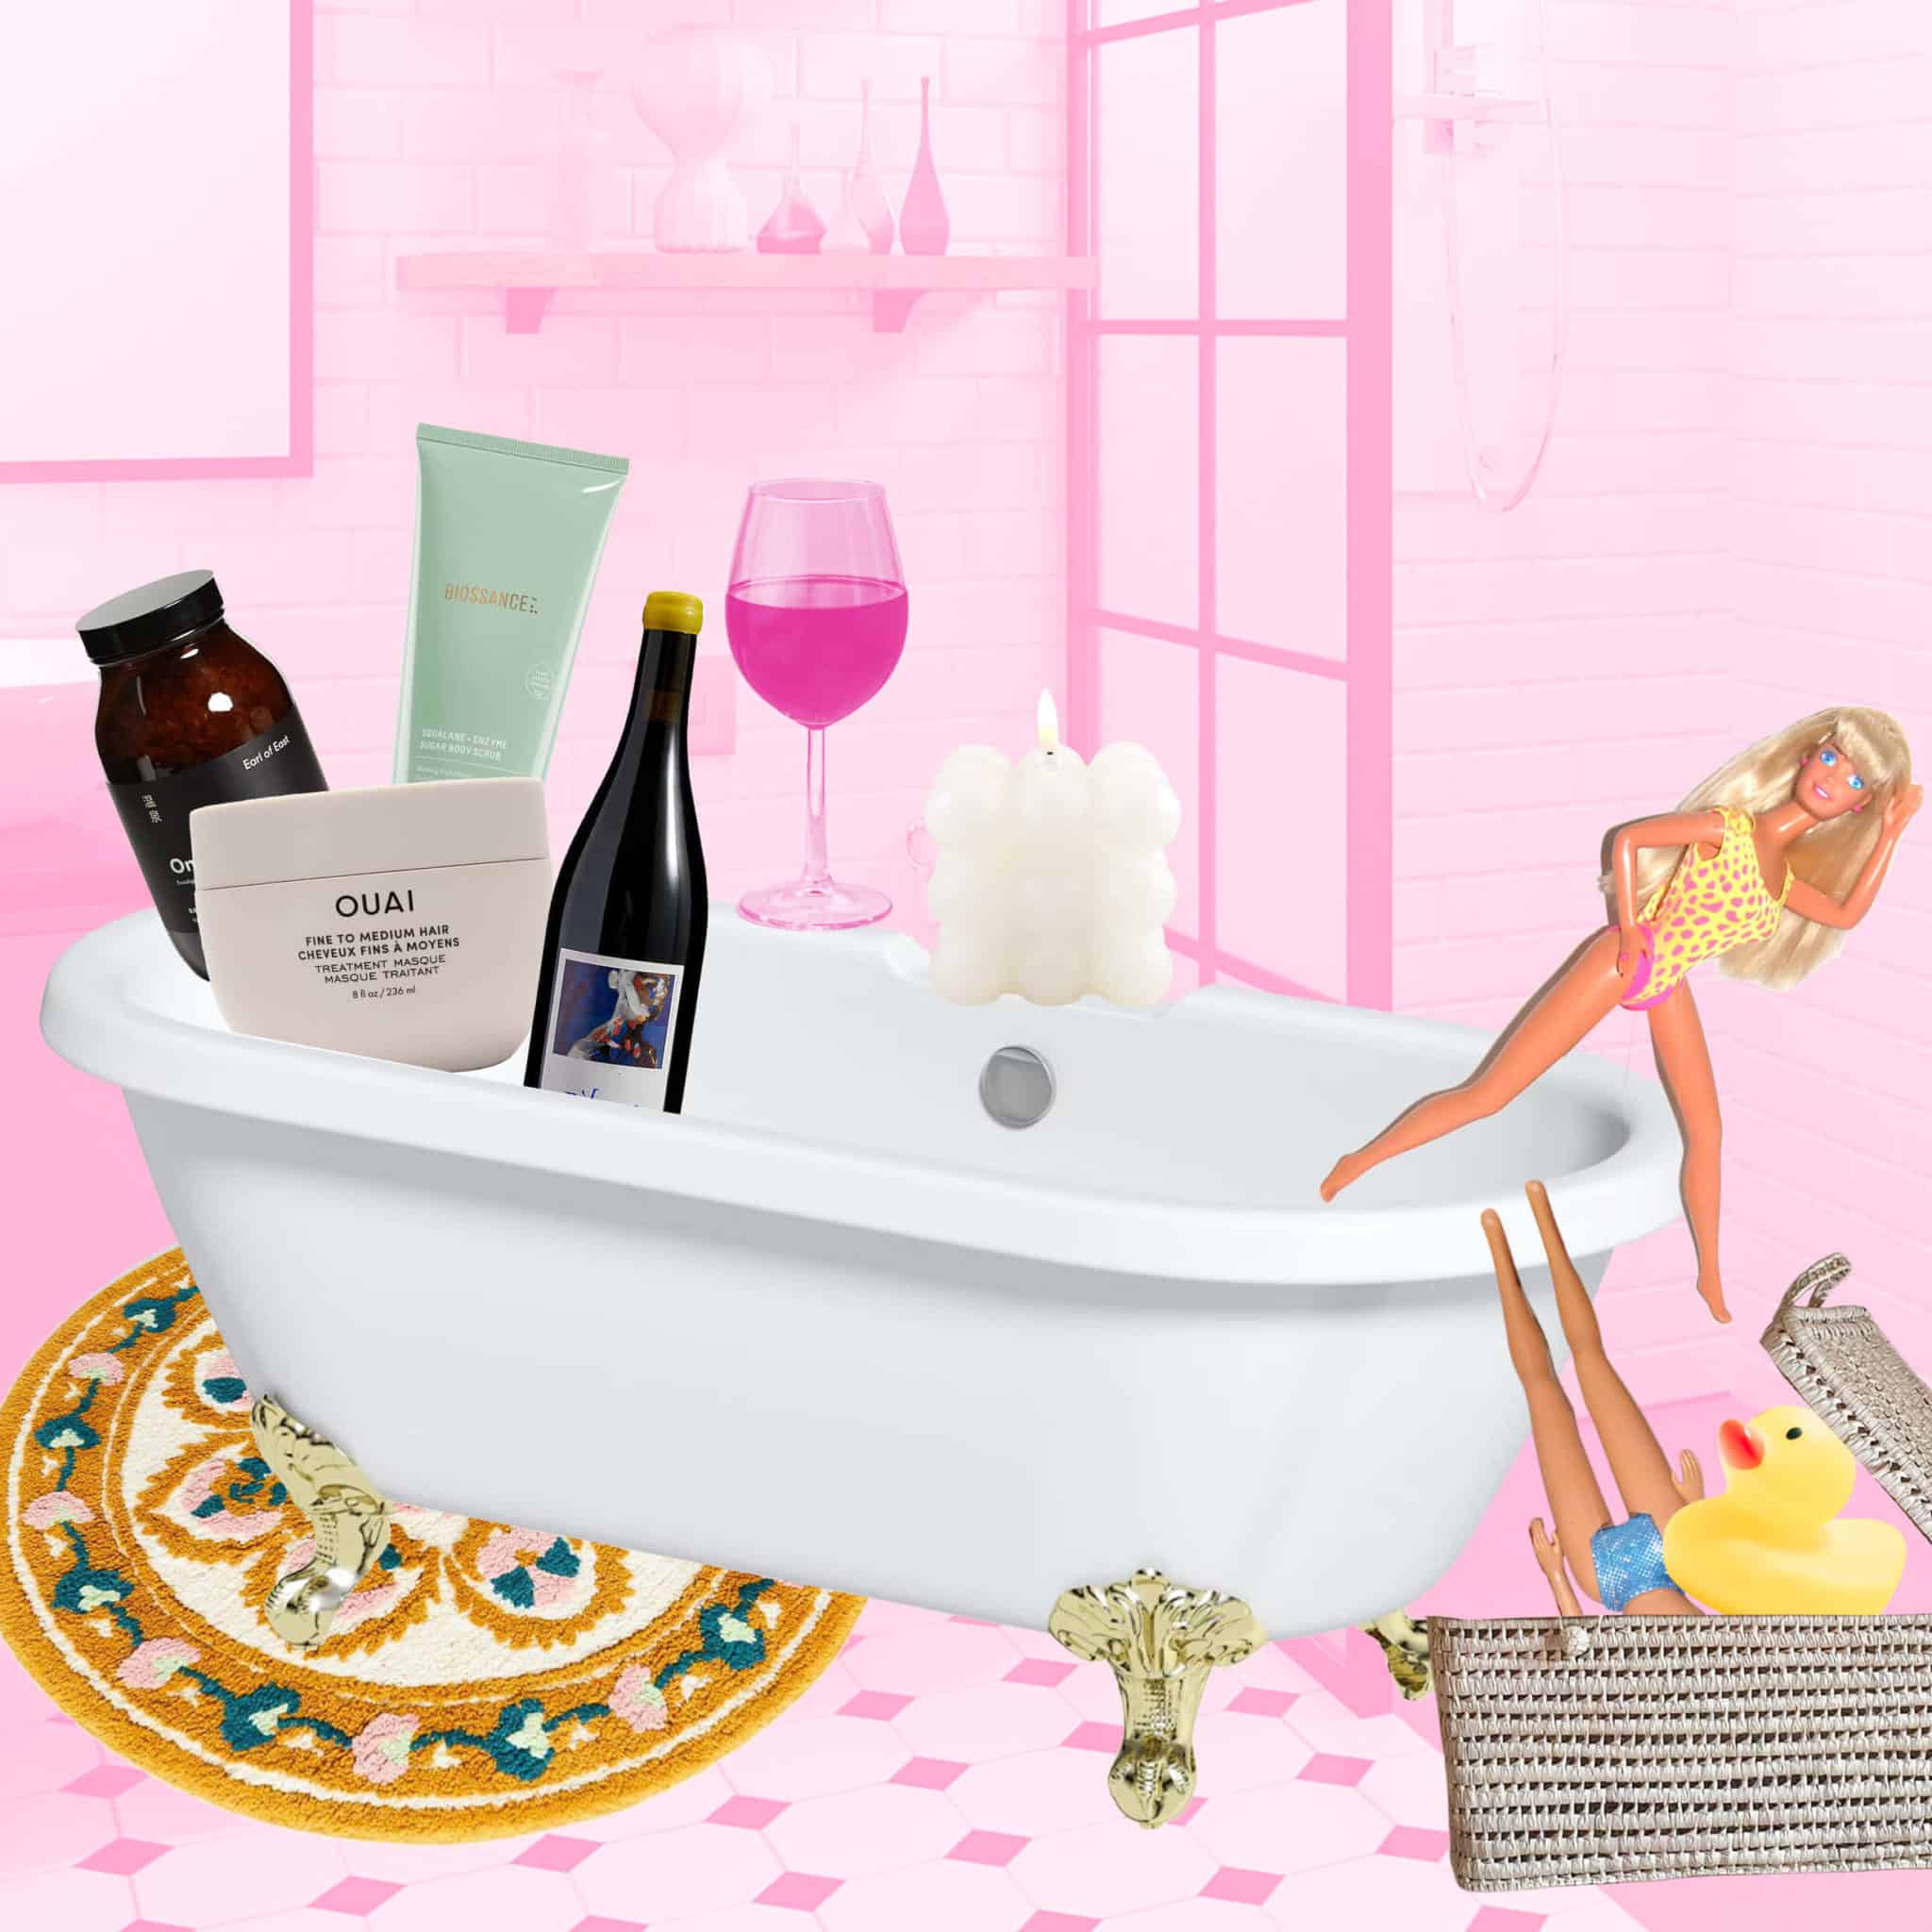 19 Luxury Bath Products That Make Your Home Feel Like a Spa